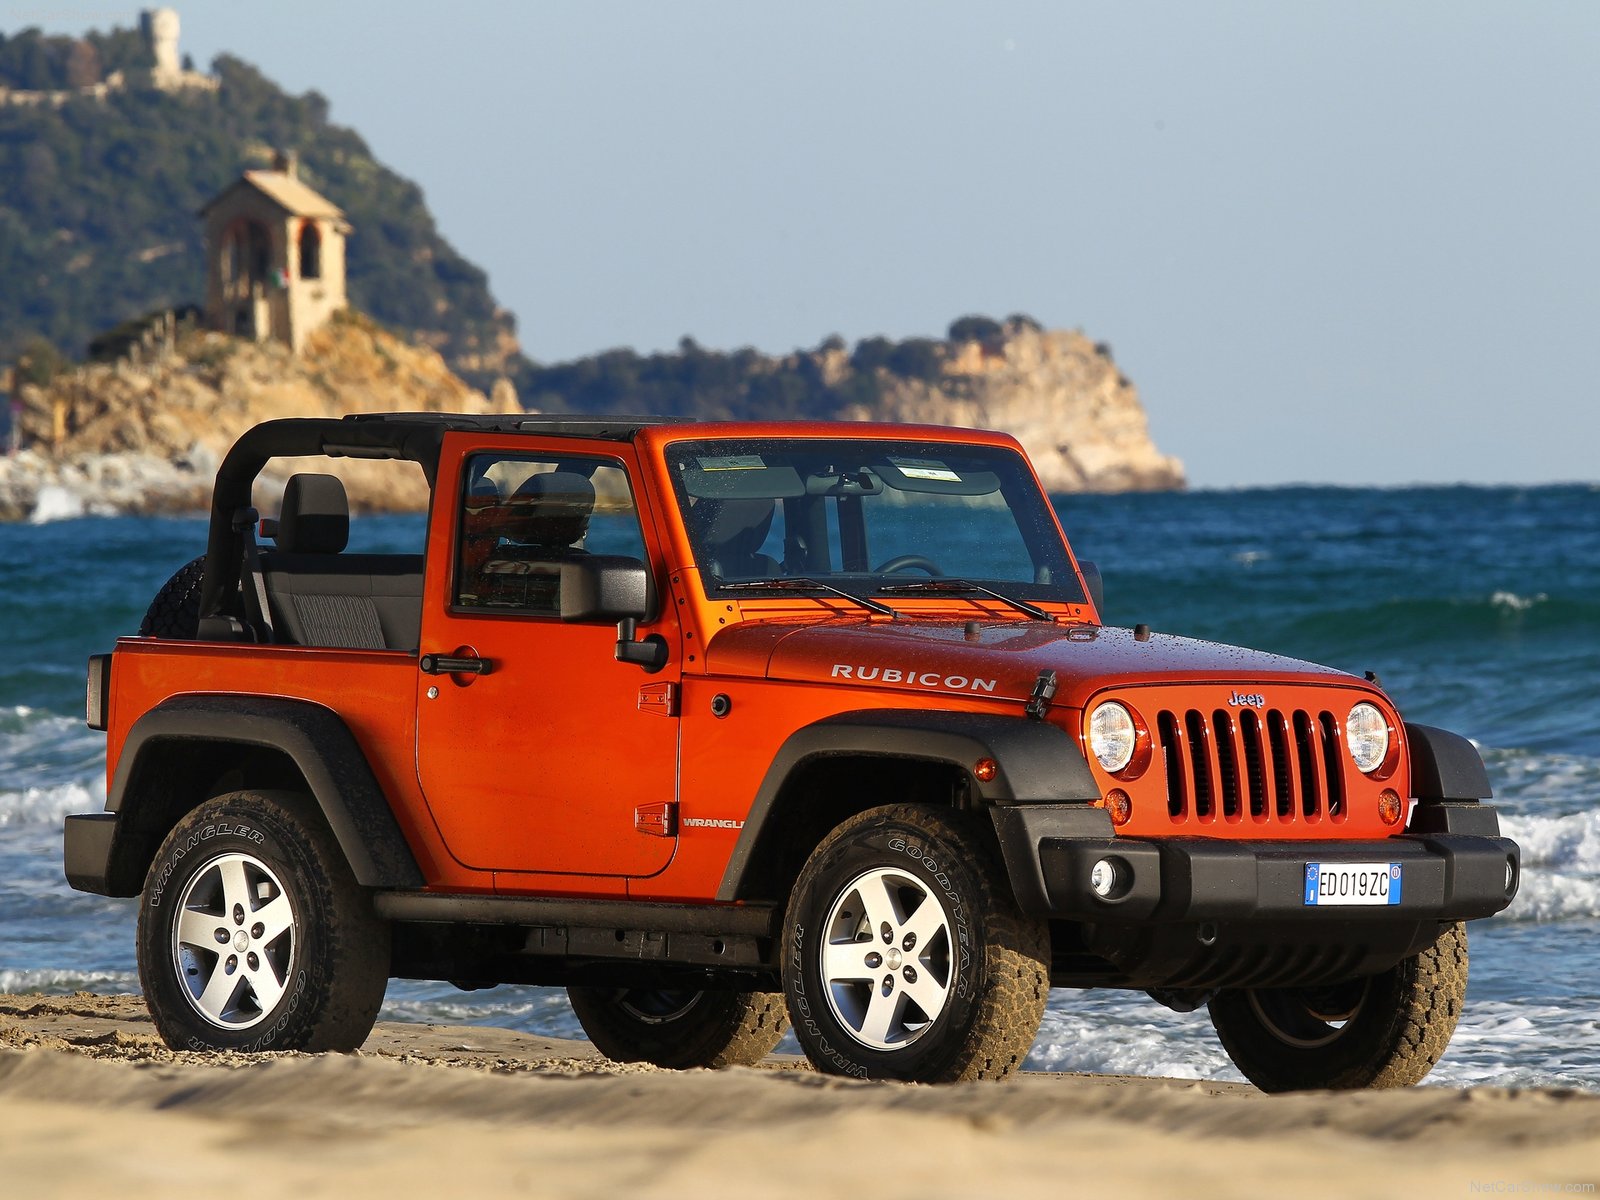 Hd wallpapers of open jeep